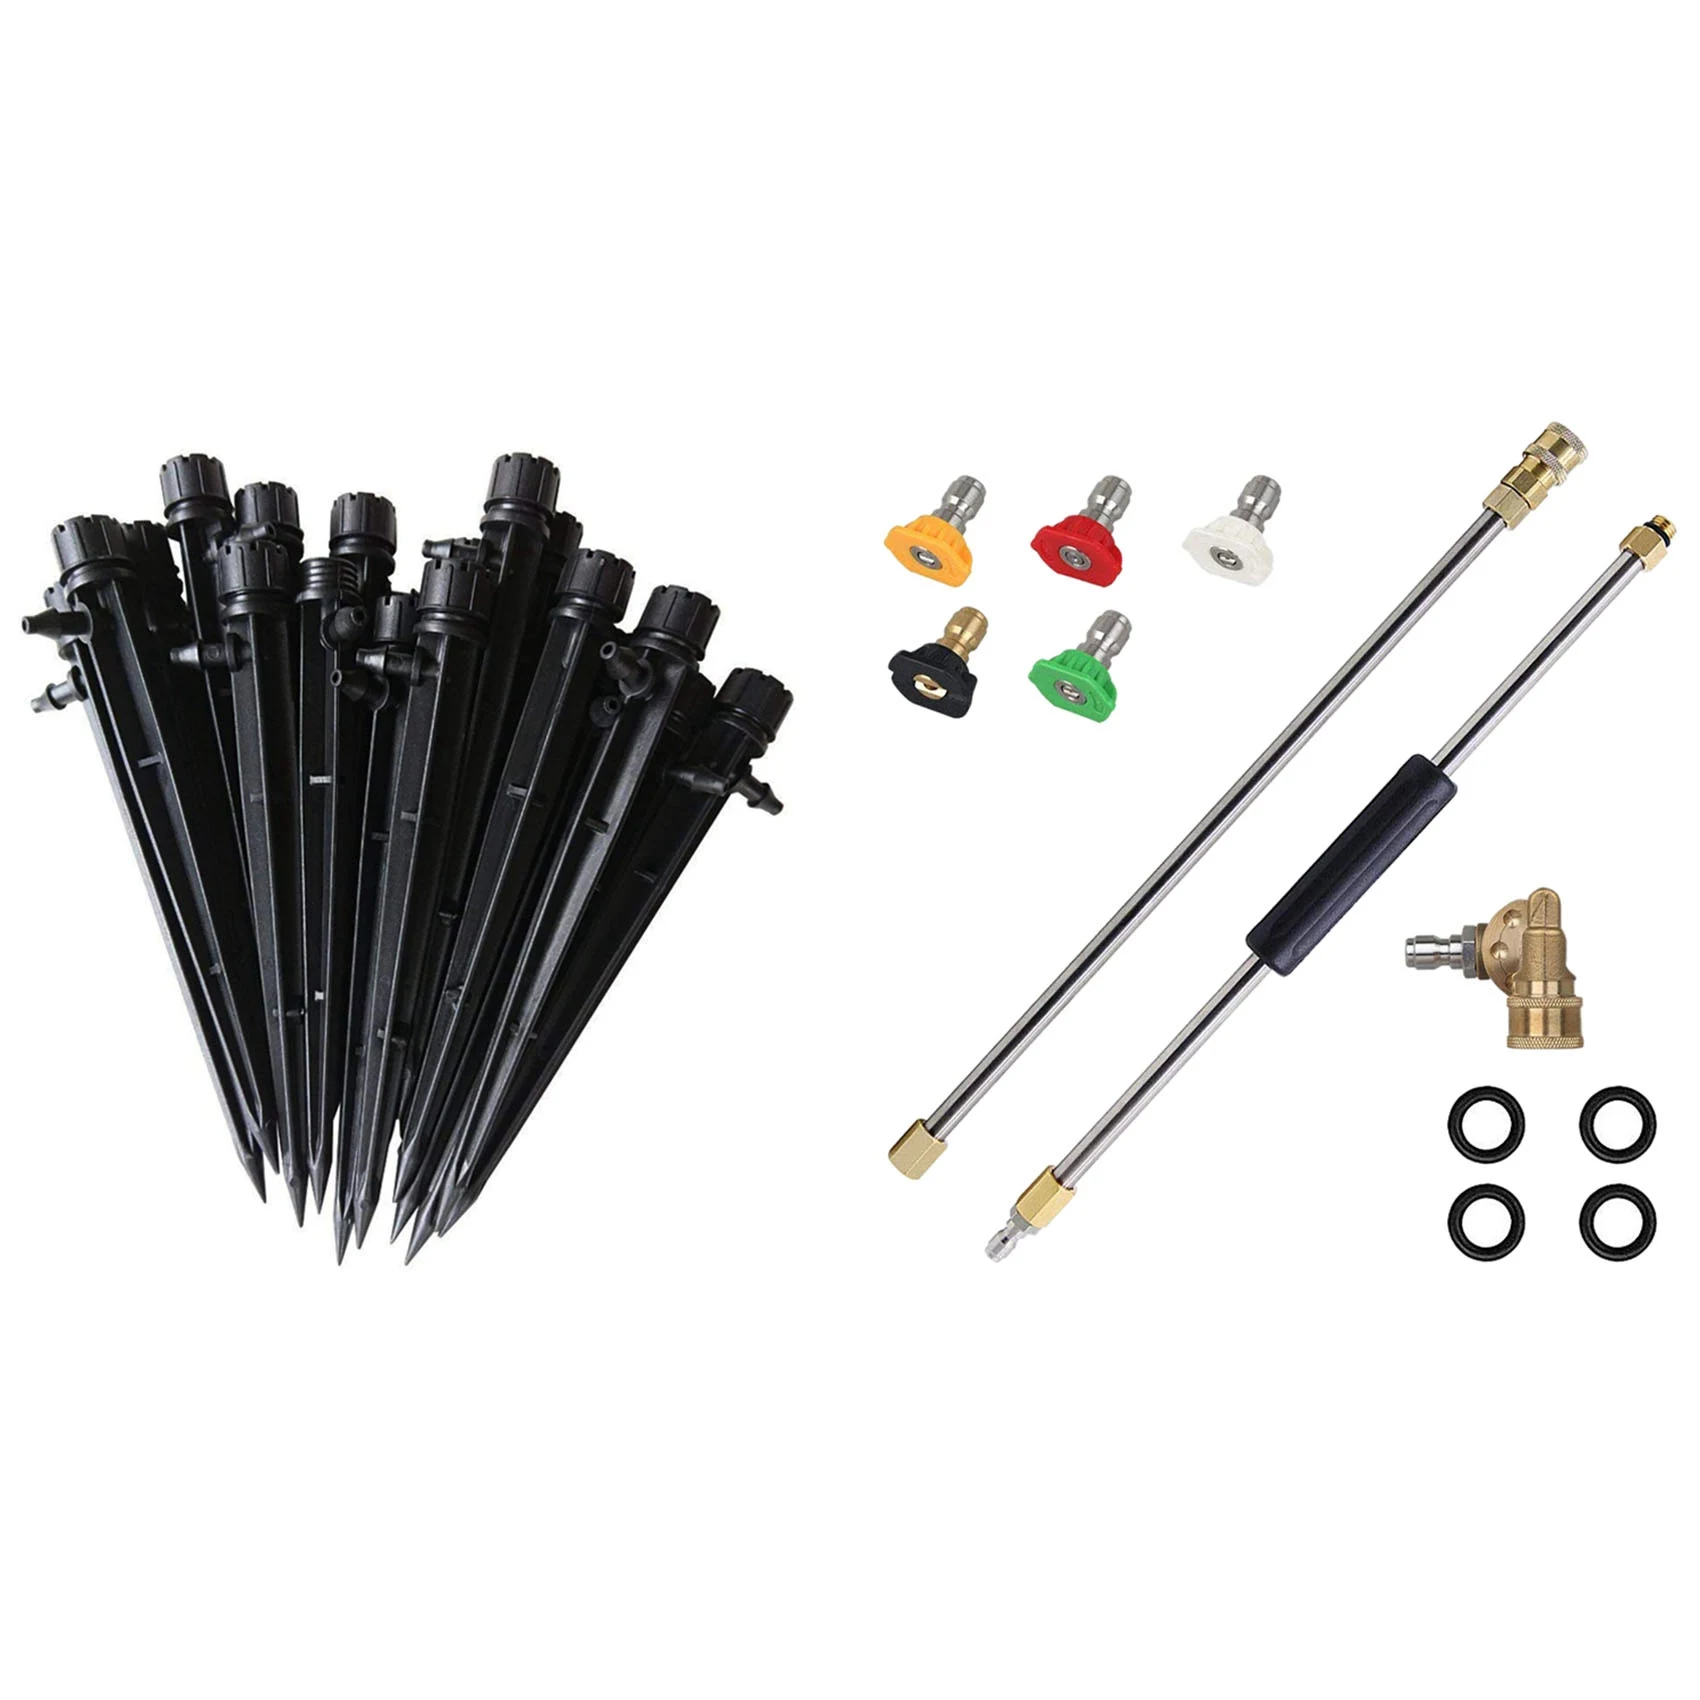 

100 Pcs Drip Emitters 360 Degree Water Flow Drip Irrigation System & 1 Set Pressure Washer Extension Spray Wand